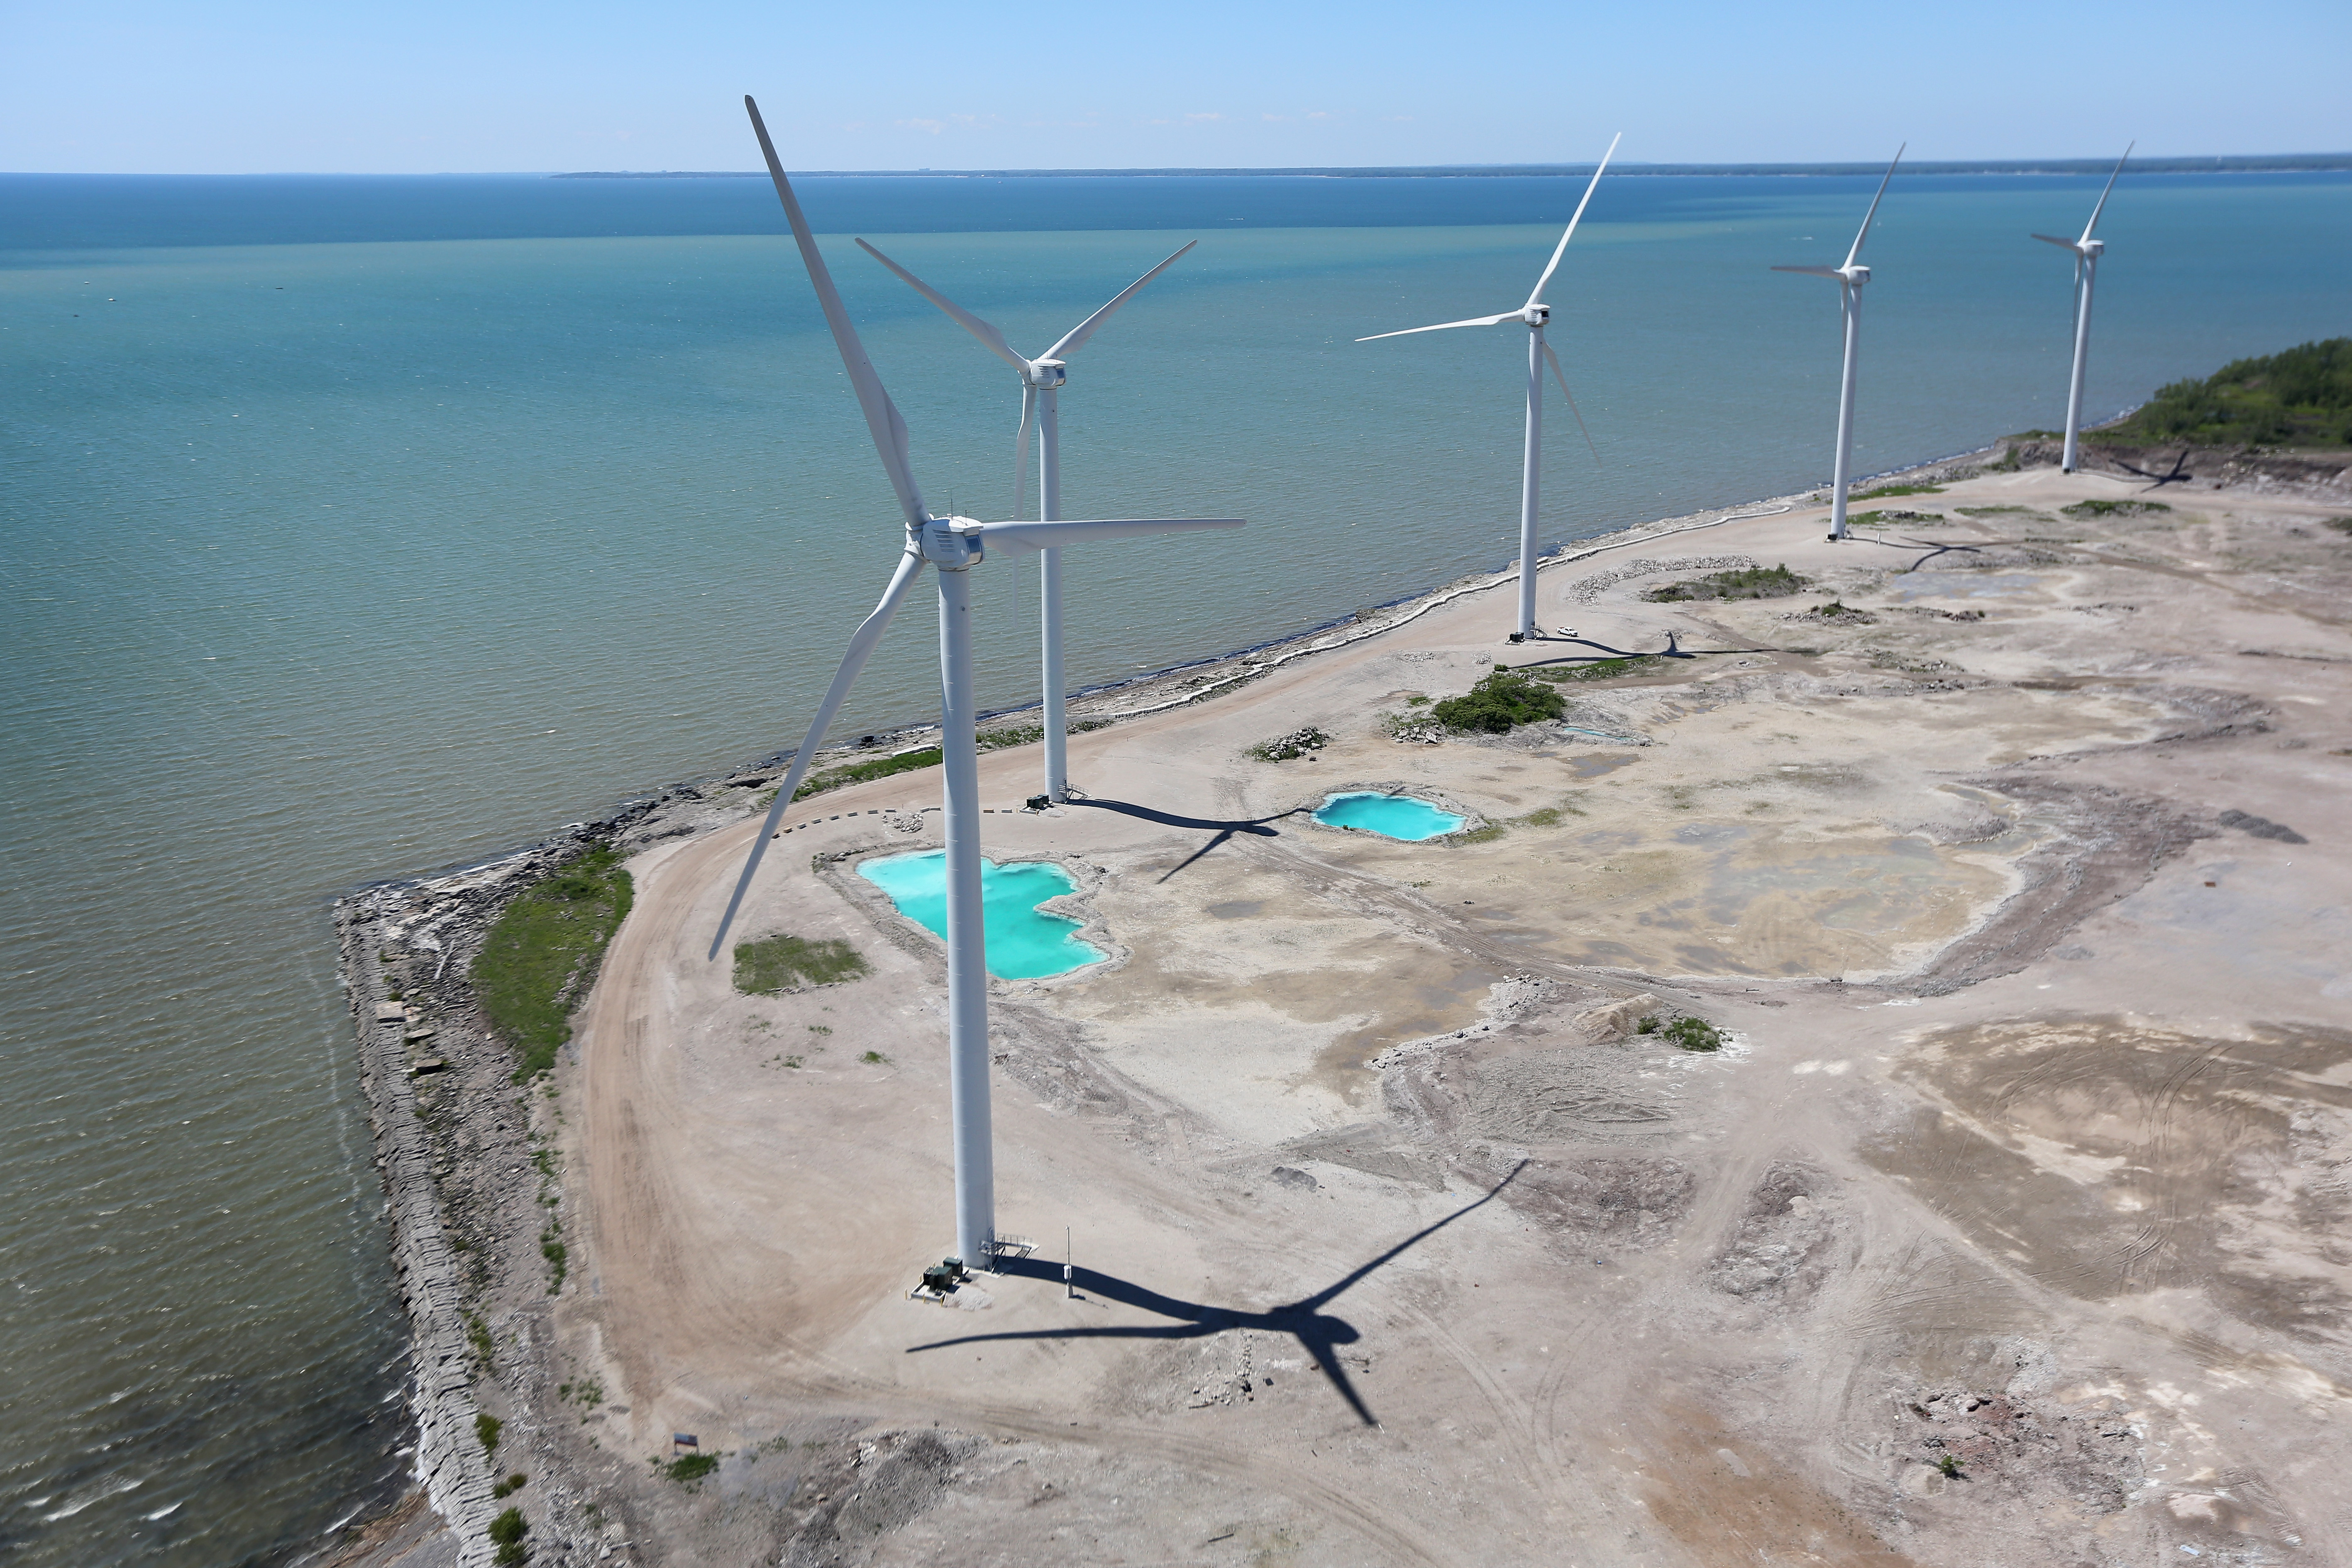 Wind Mills rise over Lake Erie on June 4, 2013 in Lackawanna, New York, near the U.S.-Canada border. The Steel Winds windmill farm, considered one of the largest urban renewable power developments in the world, is located on the grounds of the former Bethlehem Steel Plant. The aerial view was seen from a helicopter flown by the U.S. Office of Air and Marine, (OAM), which monitors and patrols the U.S.-Canada border. (Photo by John Moore/Getty Images)